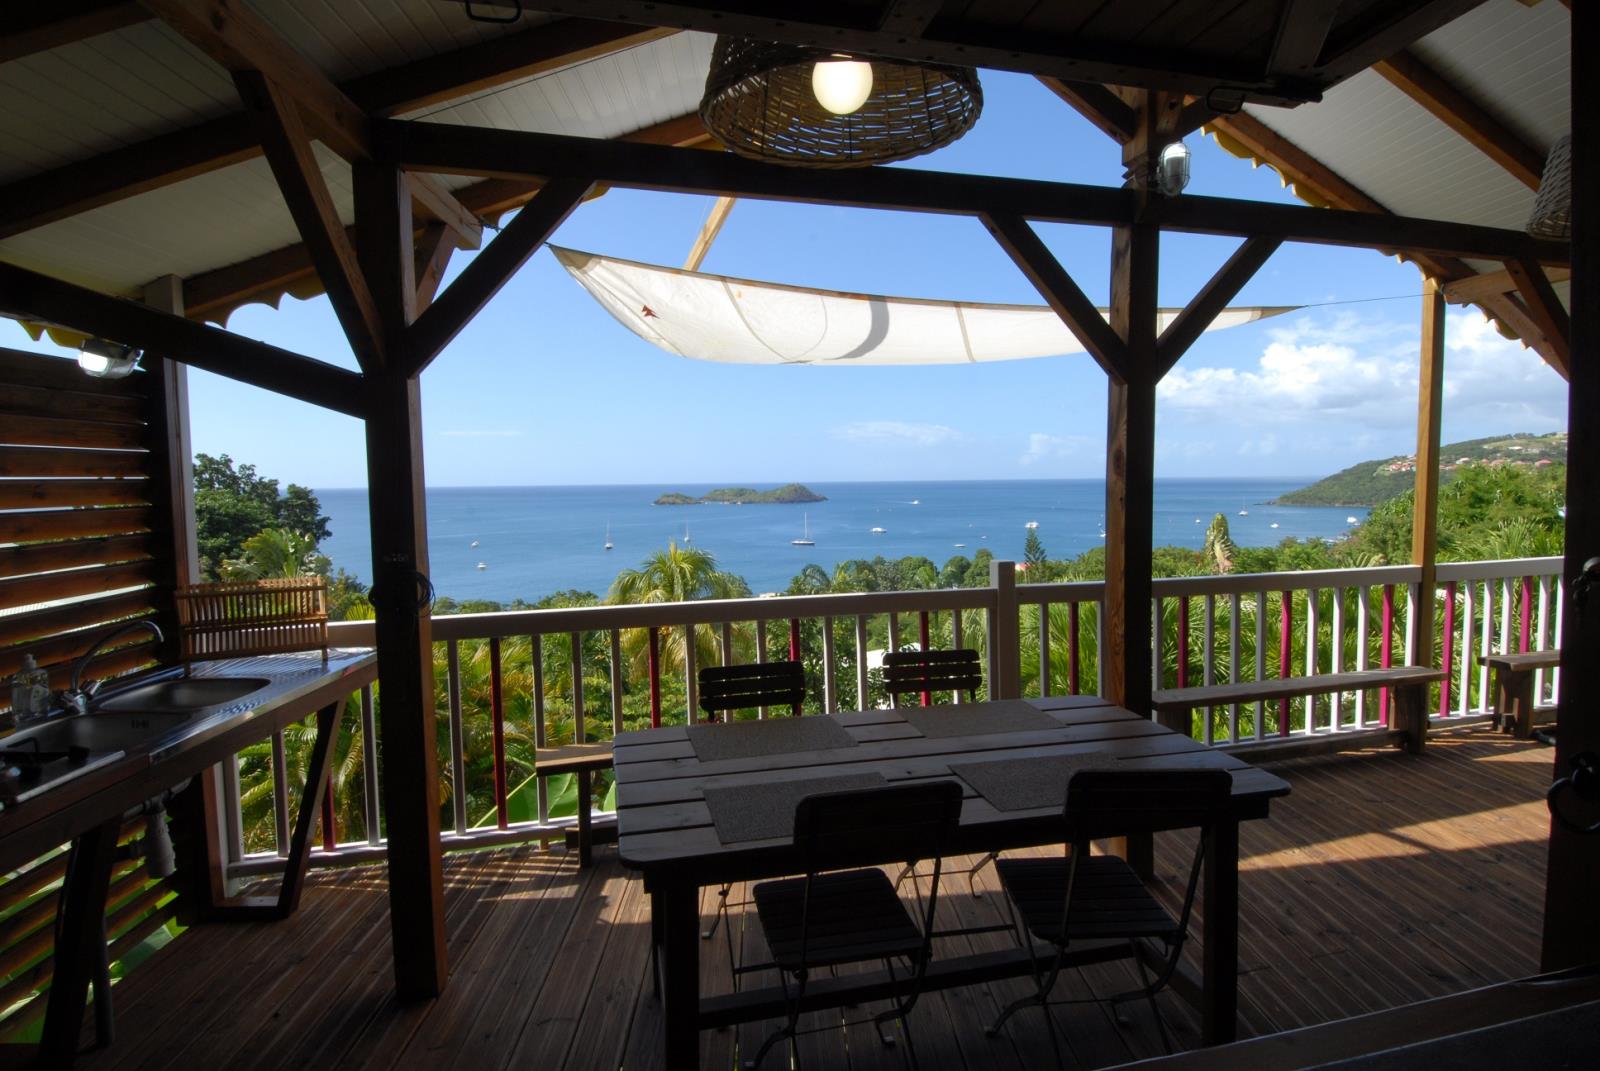 This rental is located on the French West Indies island of Guadeloupe where our campsite propose you Kay Maren , a cabin with a wonderful sea view